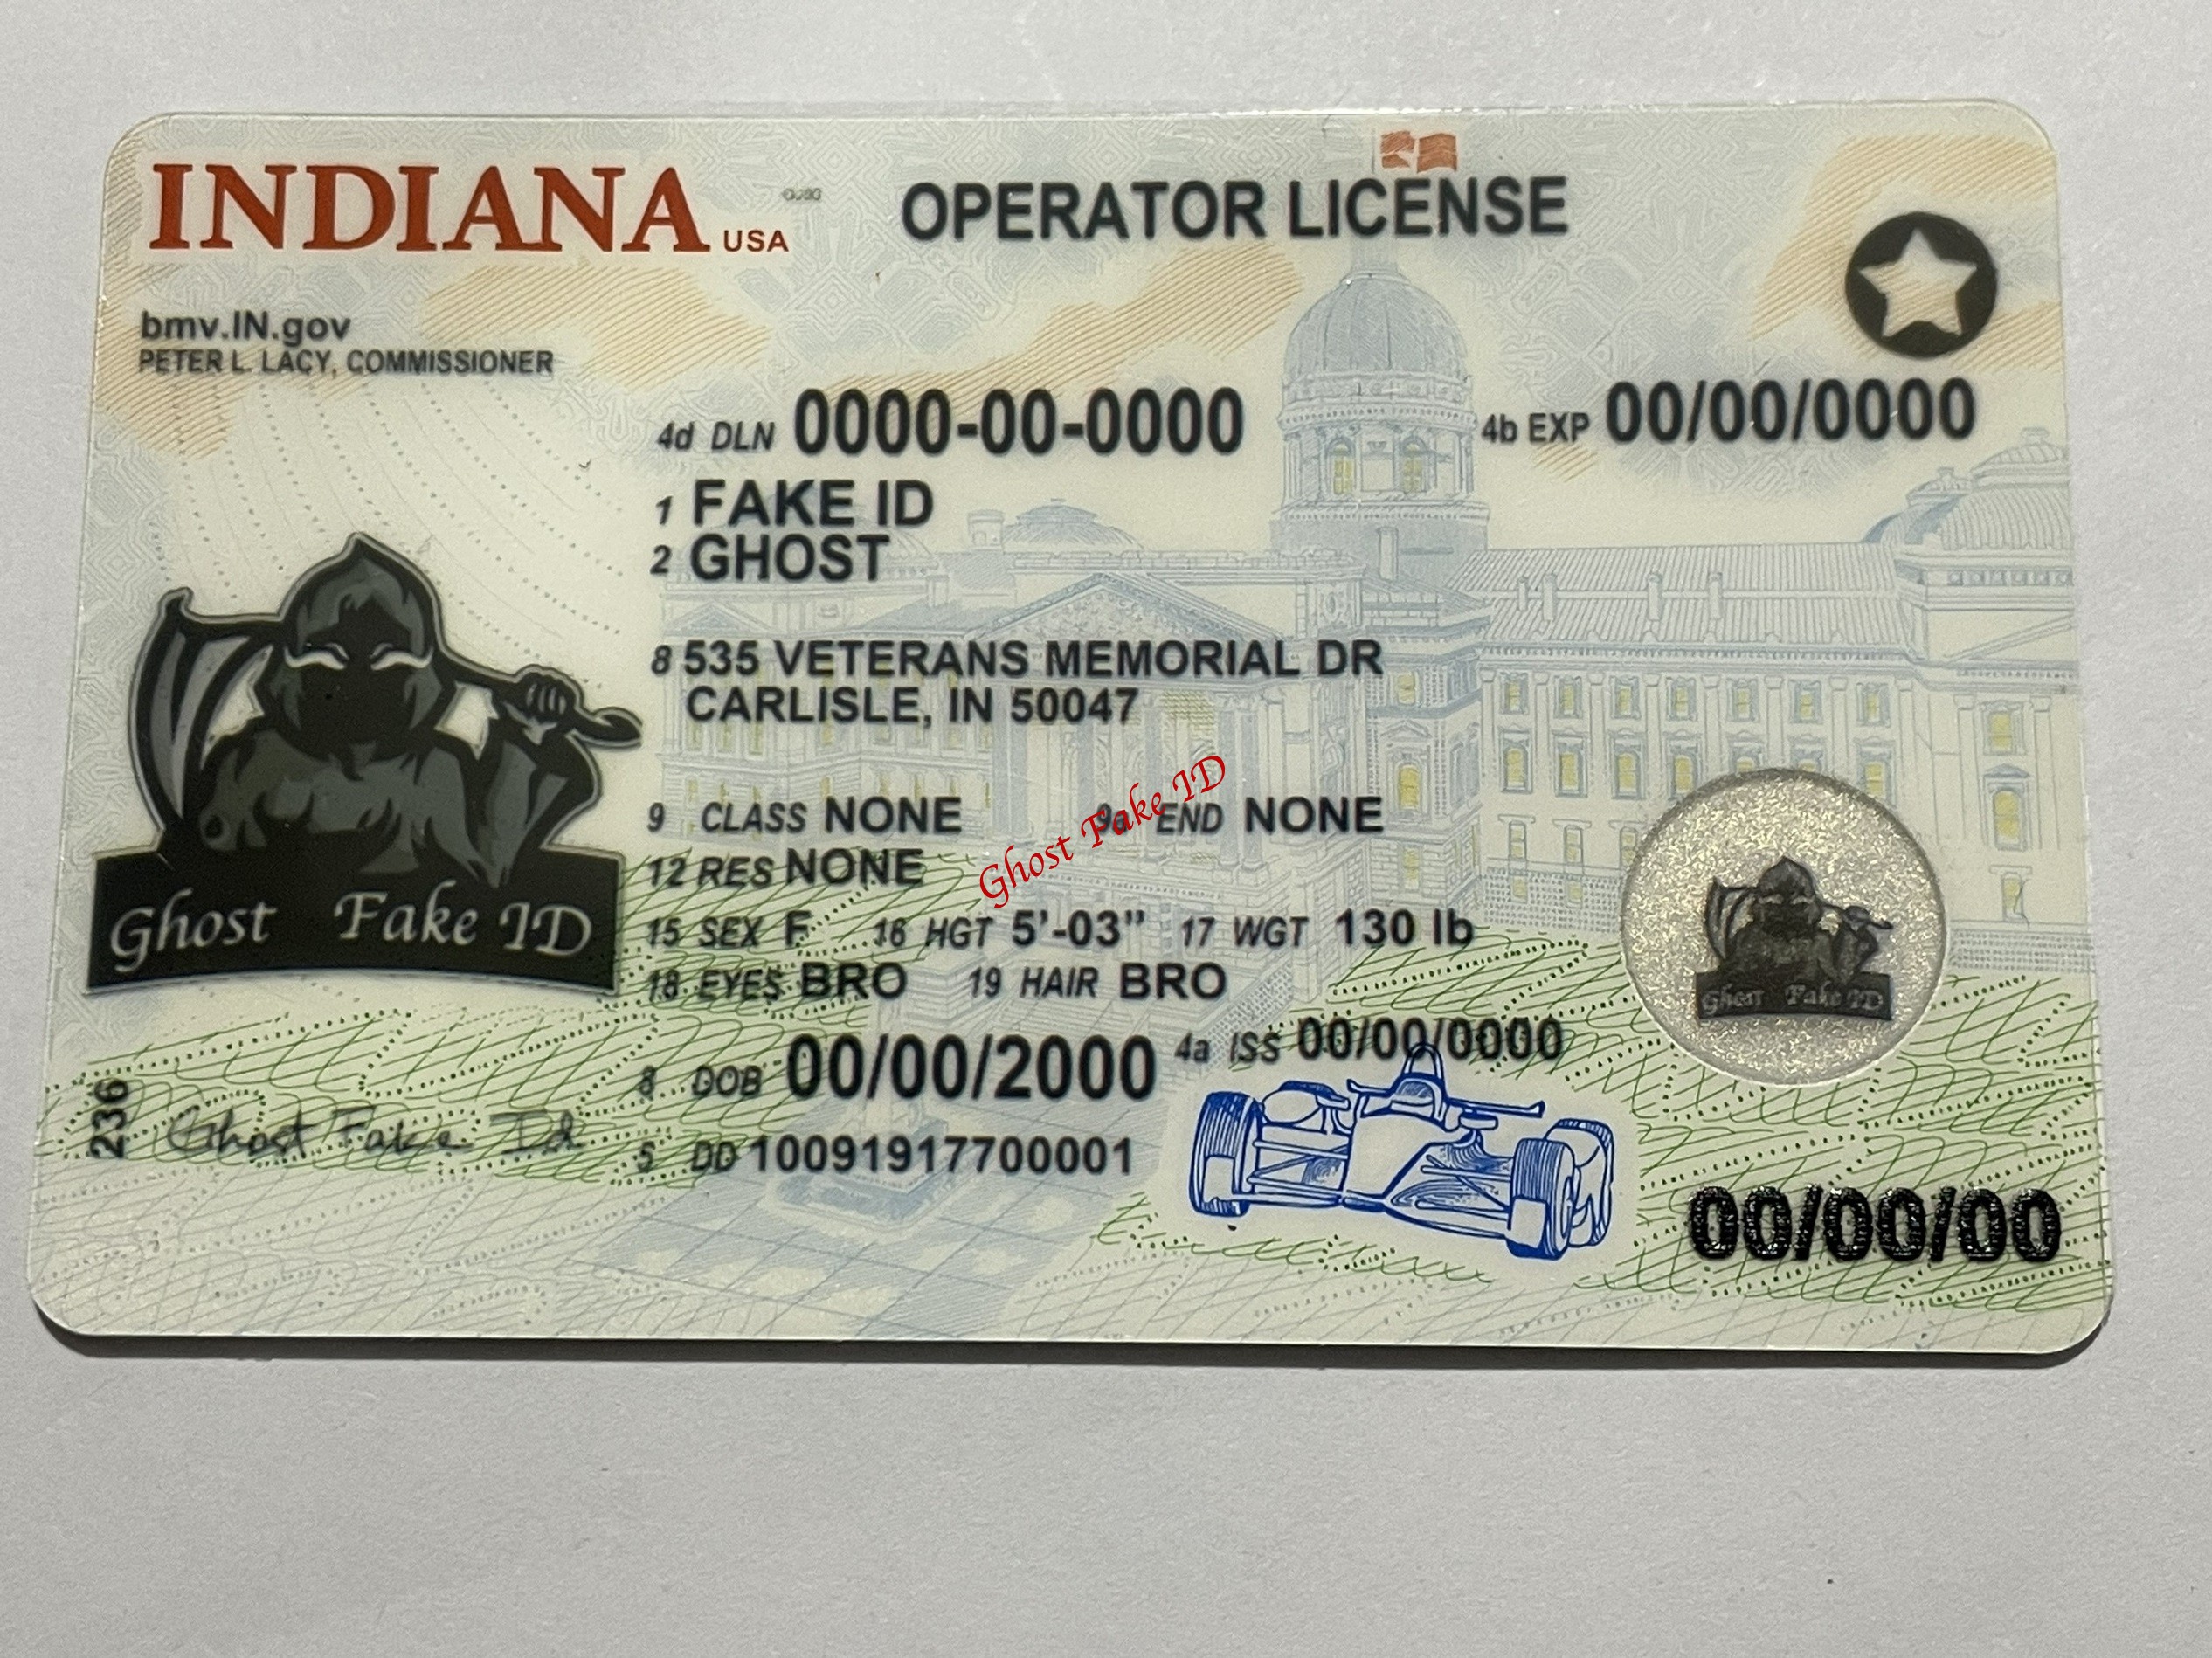 Indiana - Scanable fake id